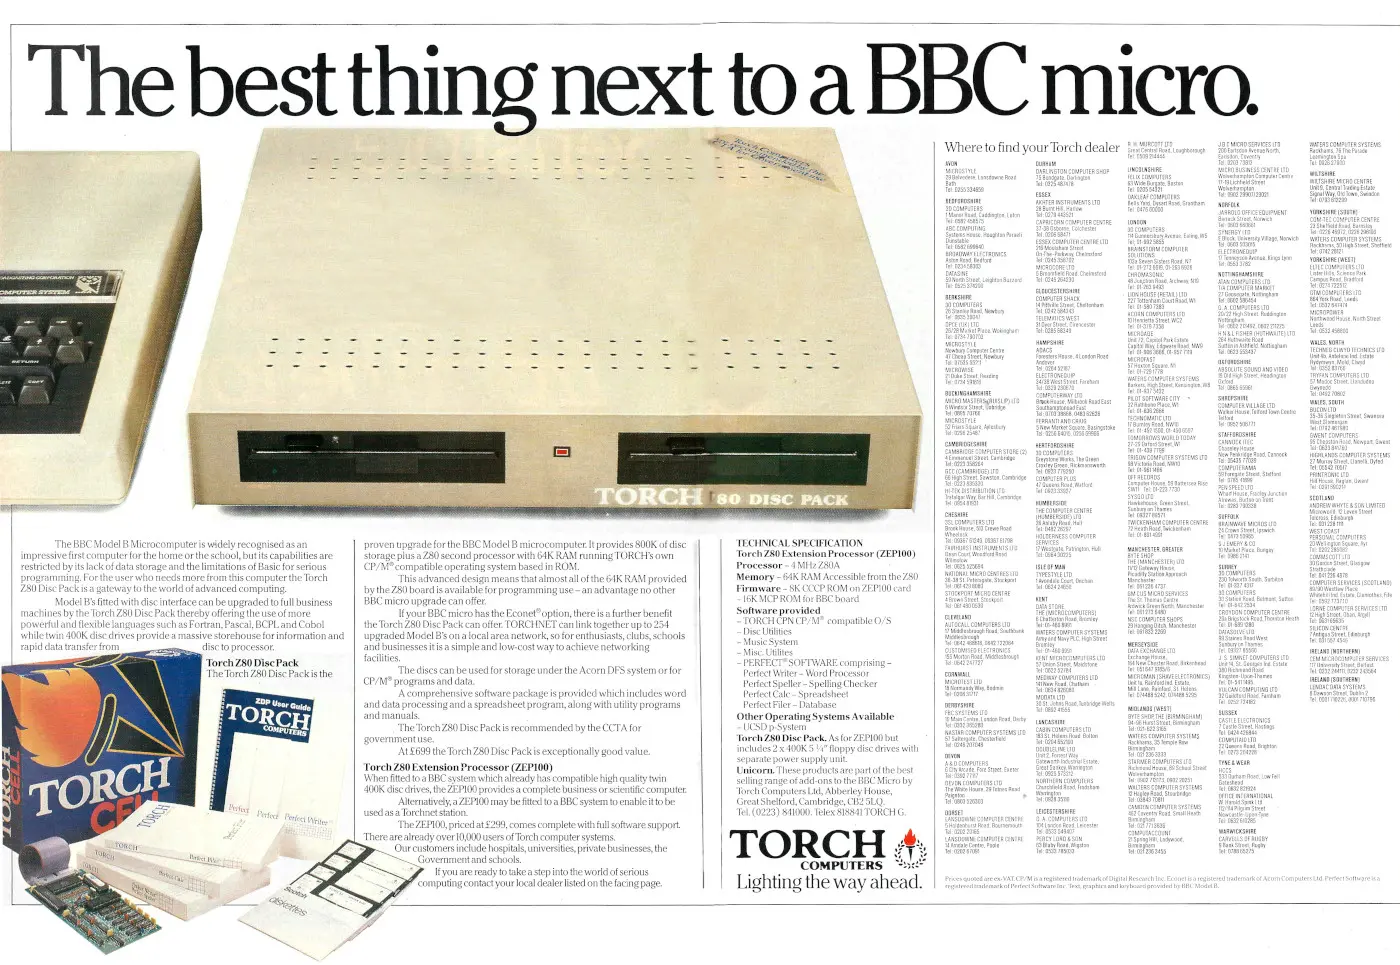 Torch Advert: The best thing next to a BBC Micro, from Personal Computer World, December 1984